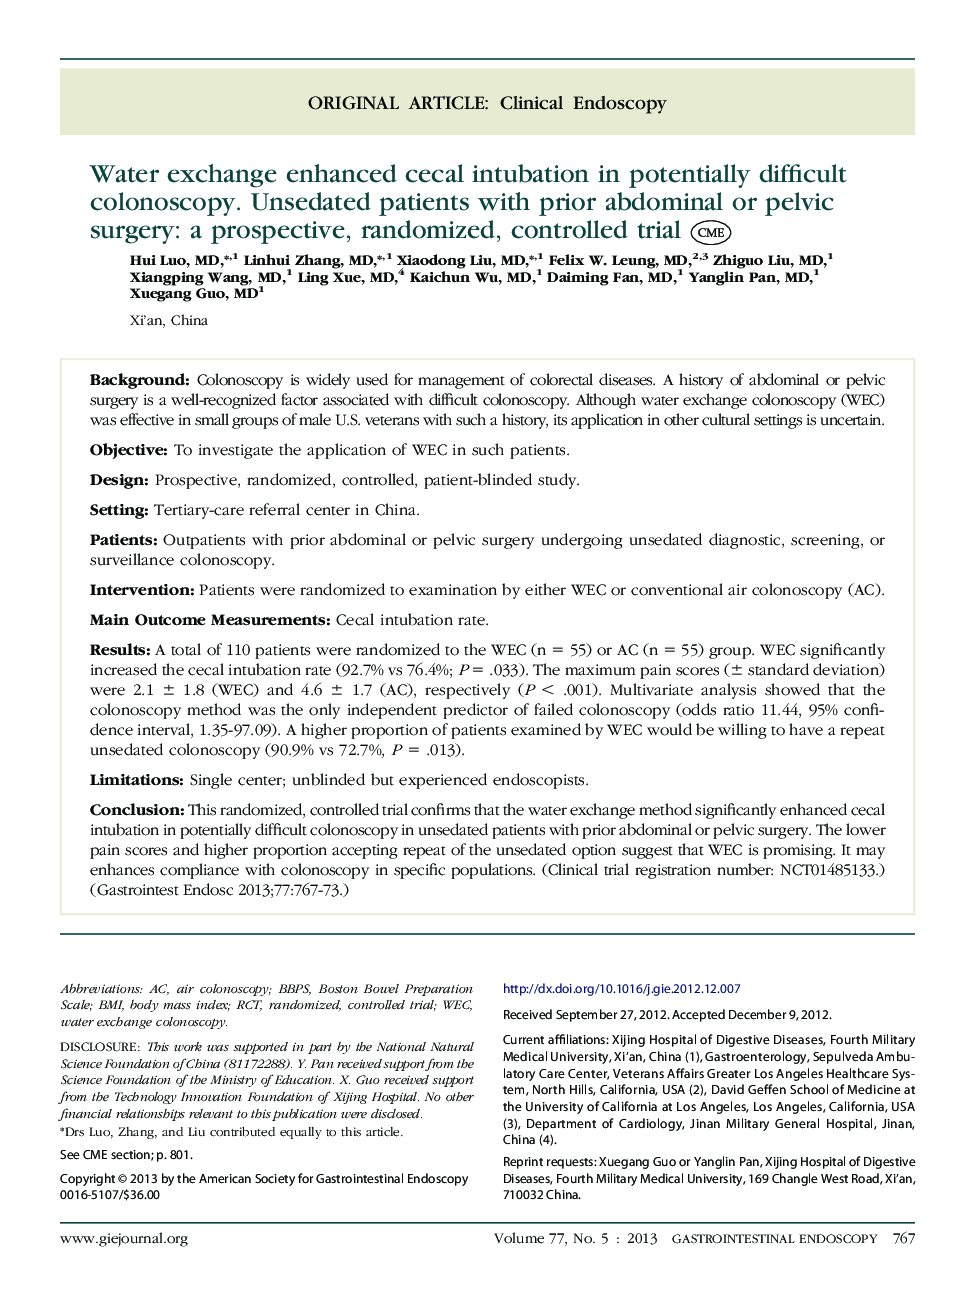 Water exchange enhanced cecal intubation in potentially difficult colonoscopy. Unsedated patients with prior abdominal or pelvic surgery: a prospective, randomized, controlled trial 